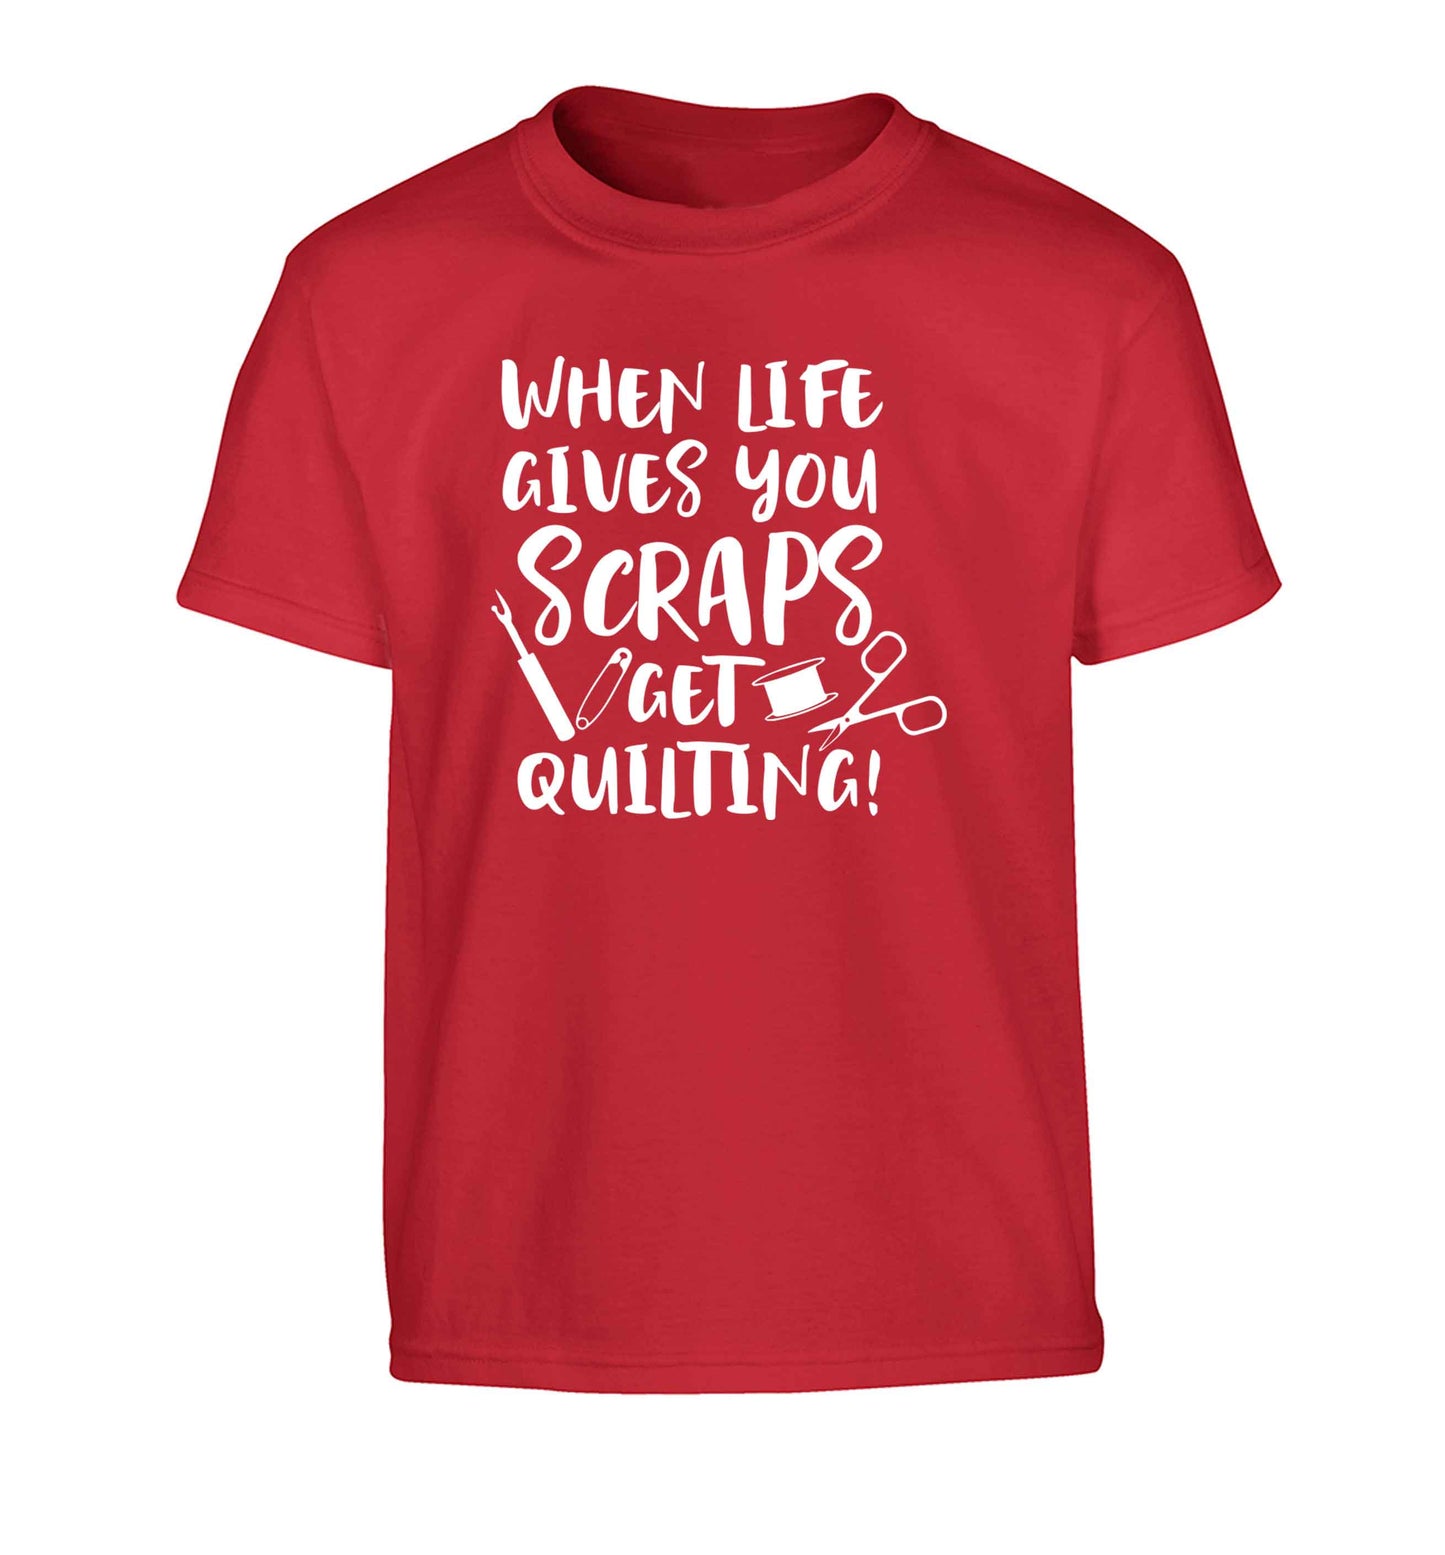 When life gives you scraps get quilting! Children's red Tshirt 12-13 Years